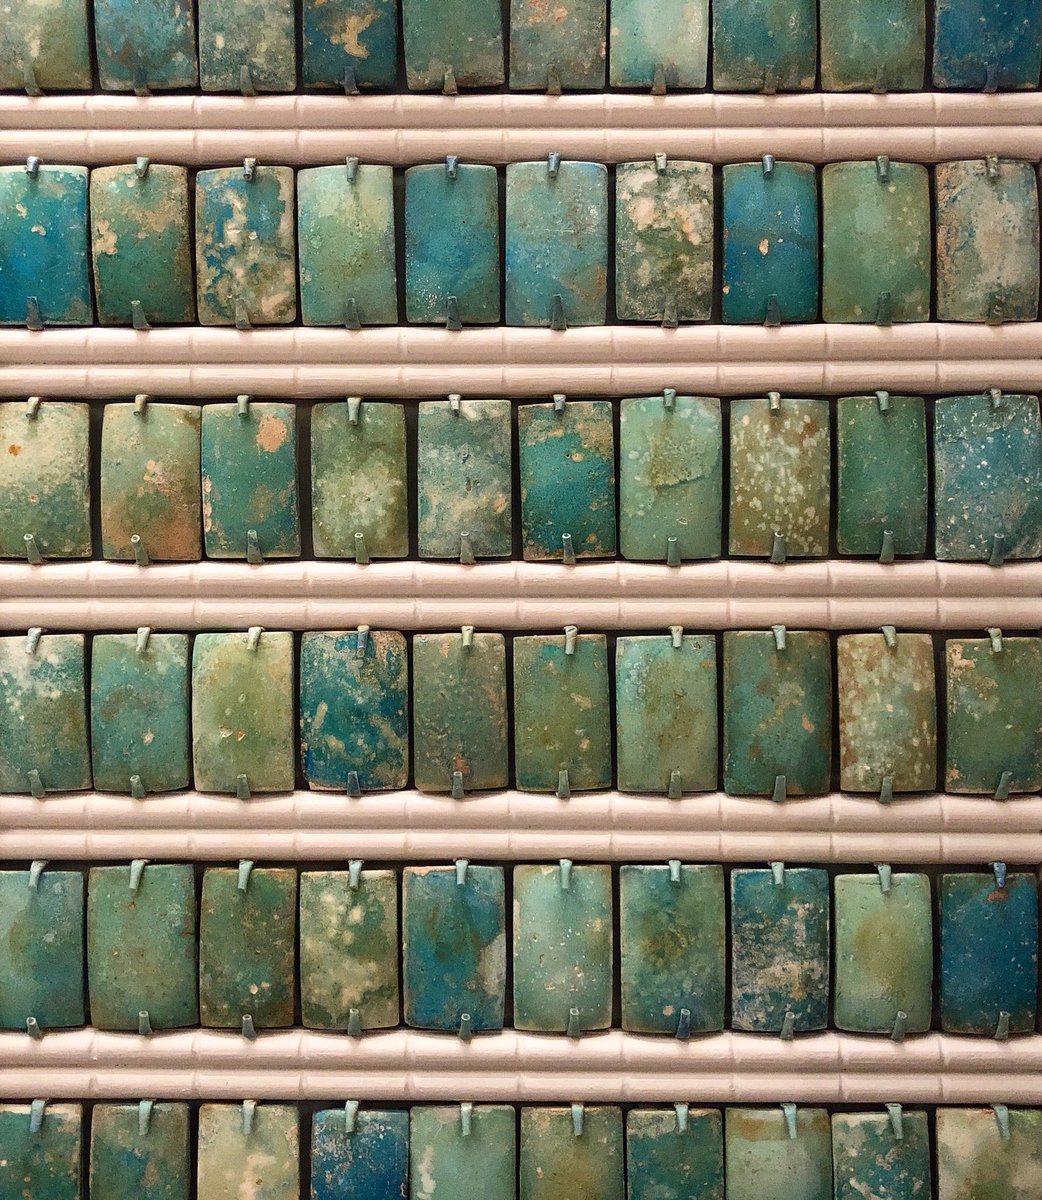 Gorgeous faience wall tiles from the funerary chamber of King Djoser in the step pyramid at Saqqara, Egypt 2670 BC. #FitzwilliamMuseum